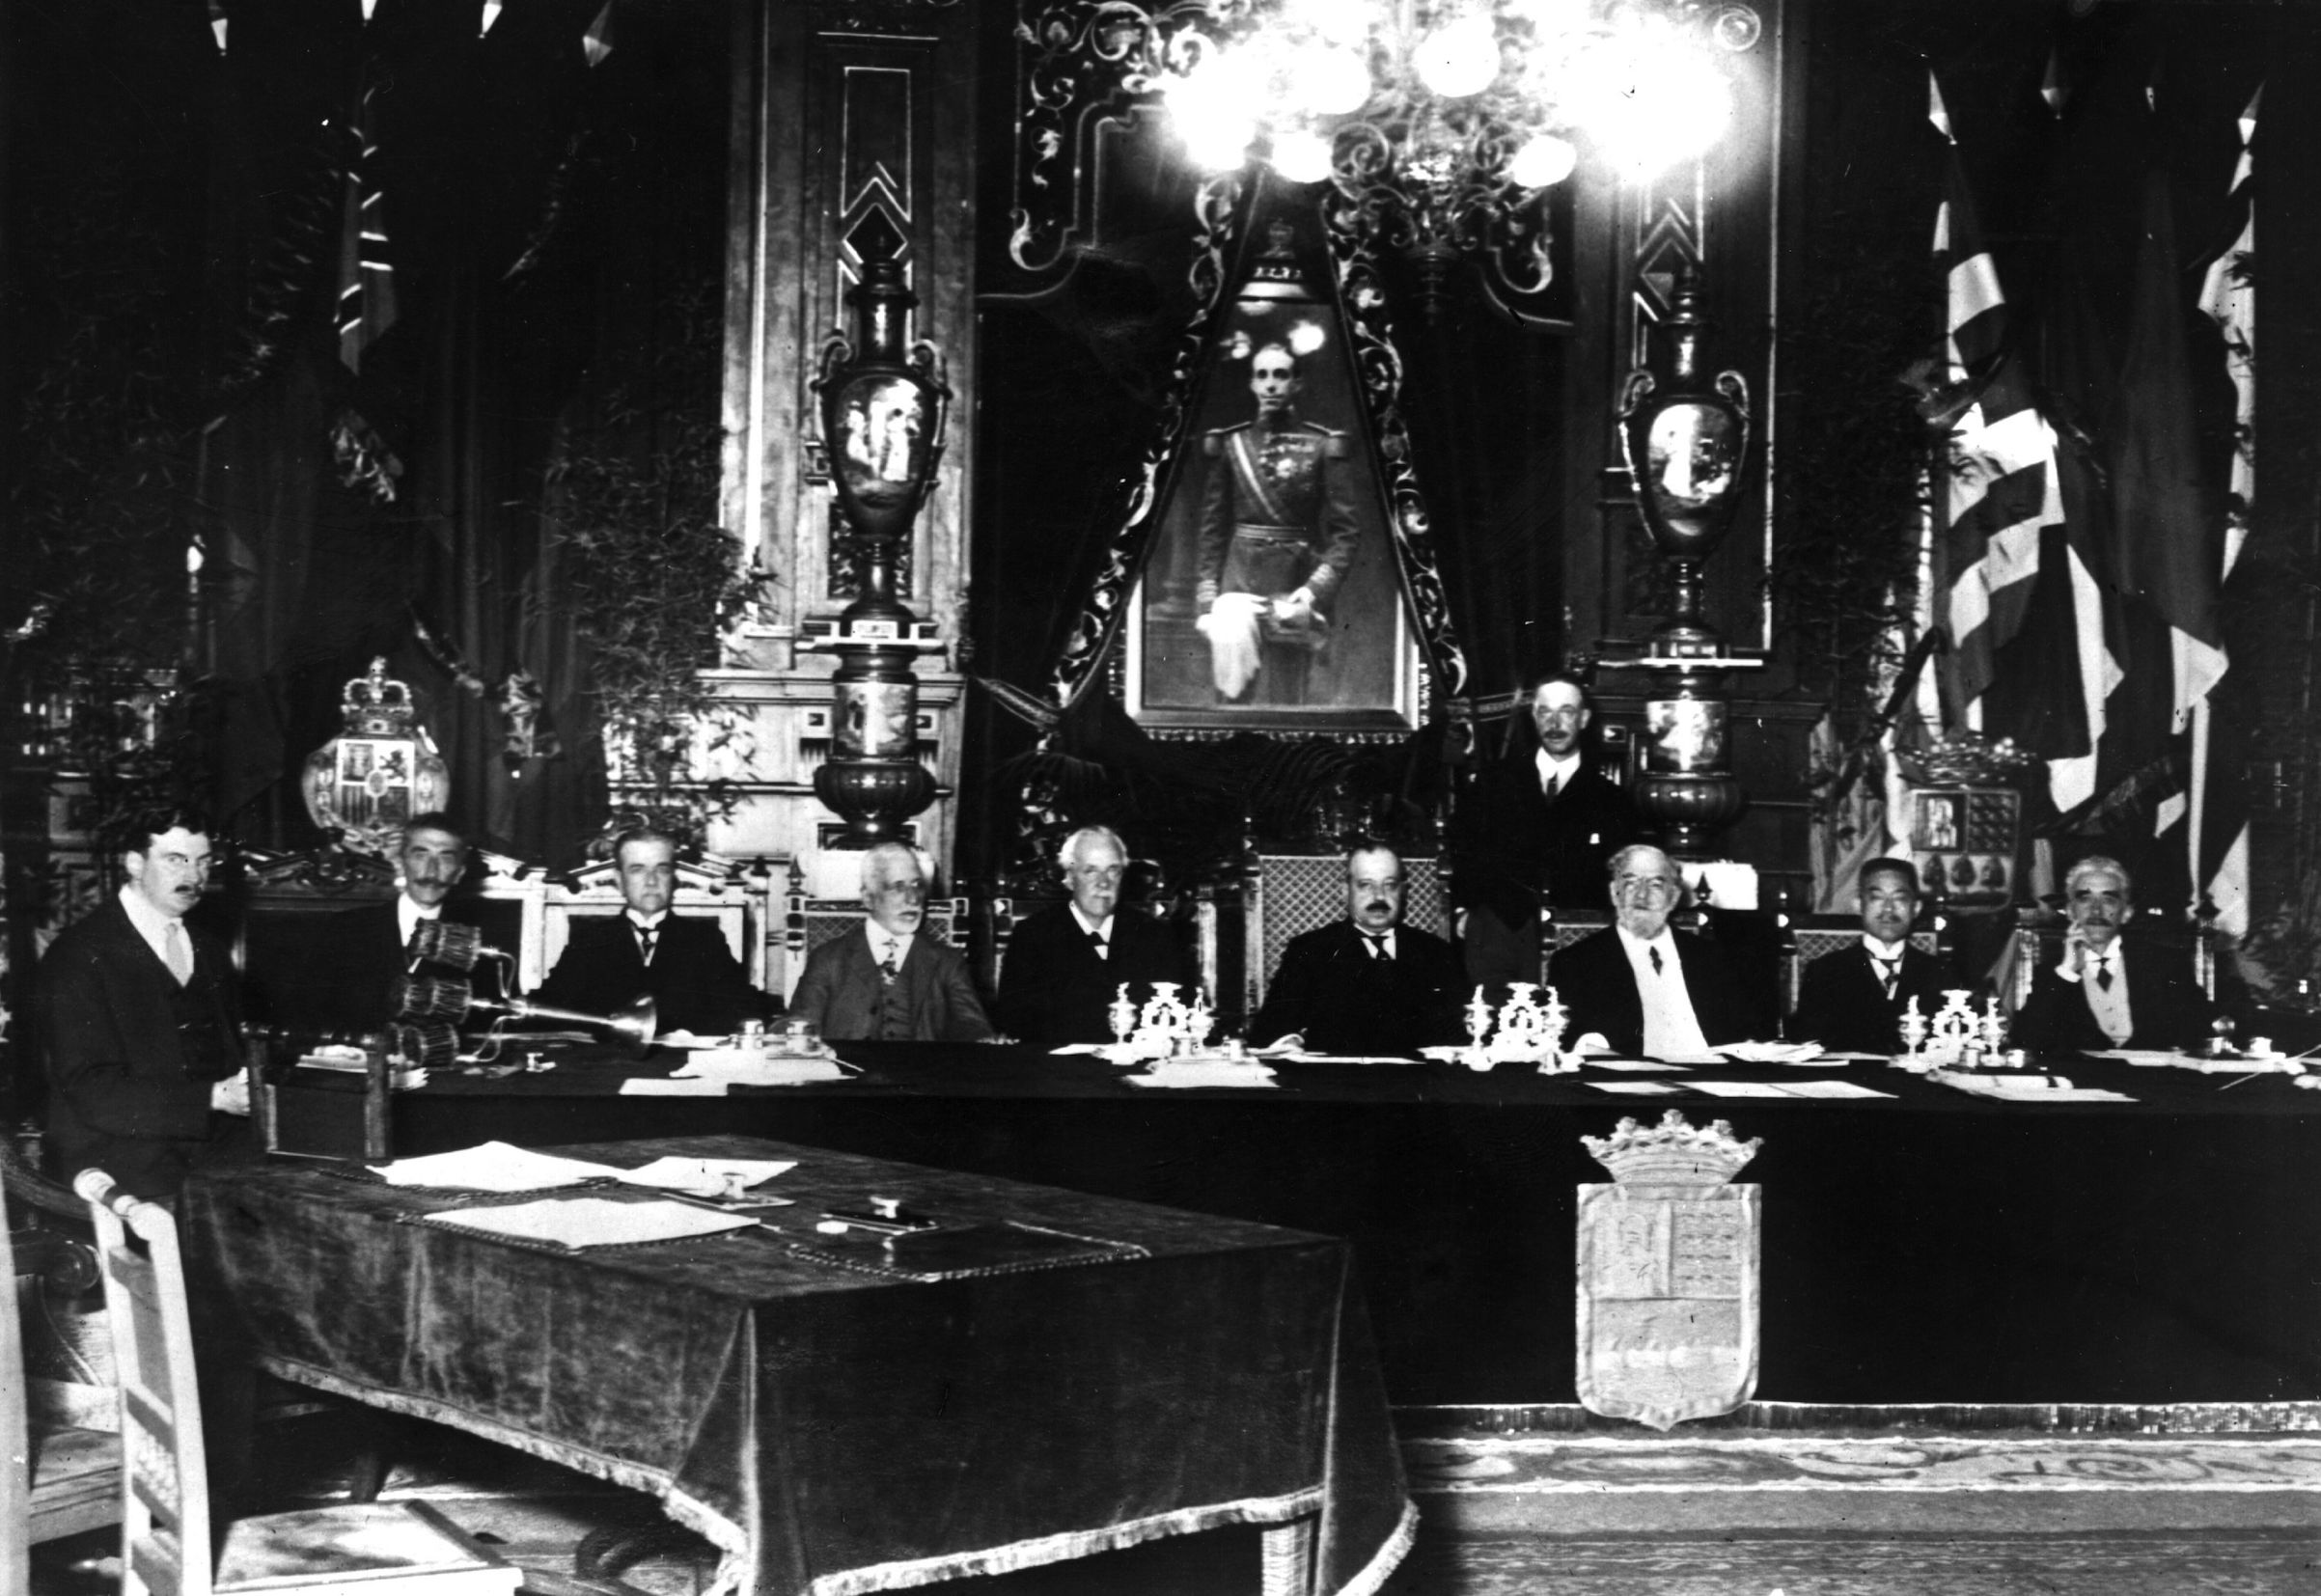 Nov. 15, 1920:  The first session of the Council of the League of Nations with their coat-of-arms. (Topical Press Agency/Getty Images)